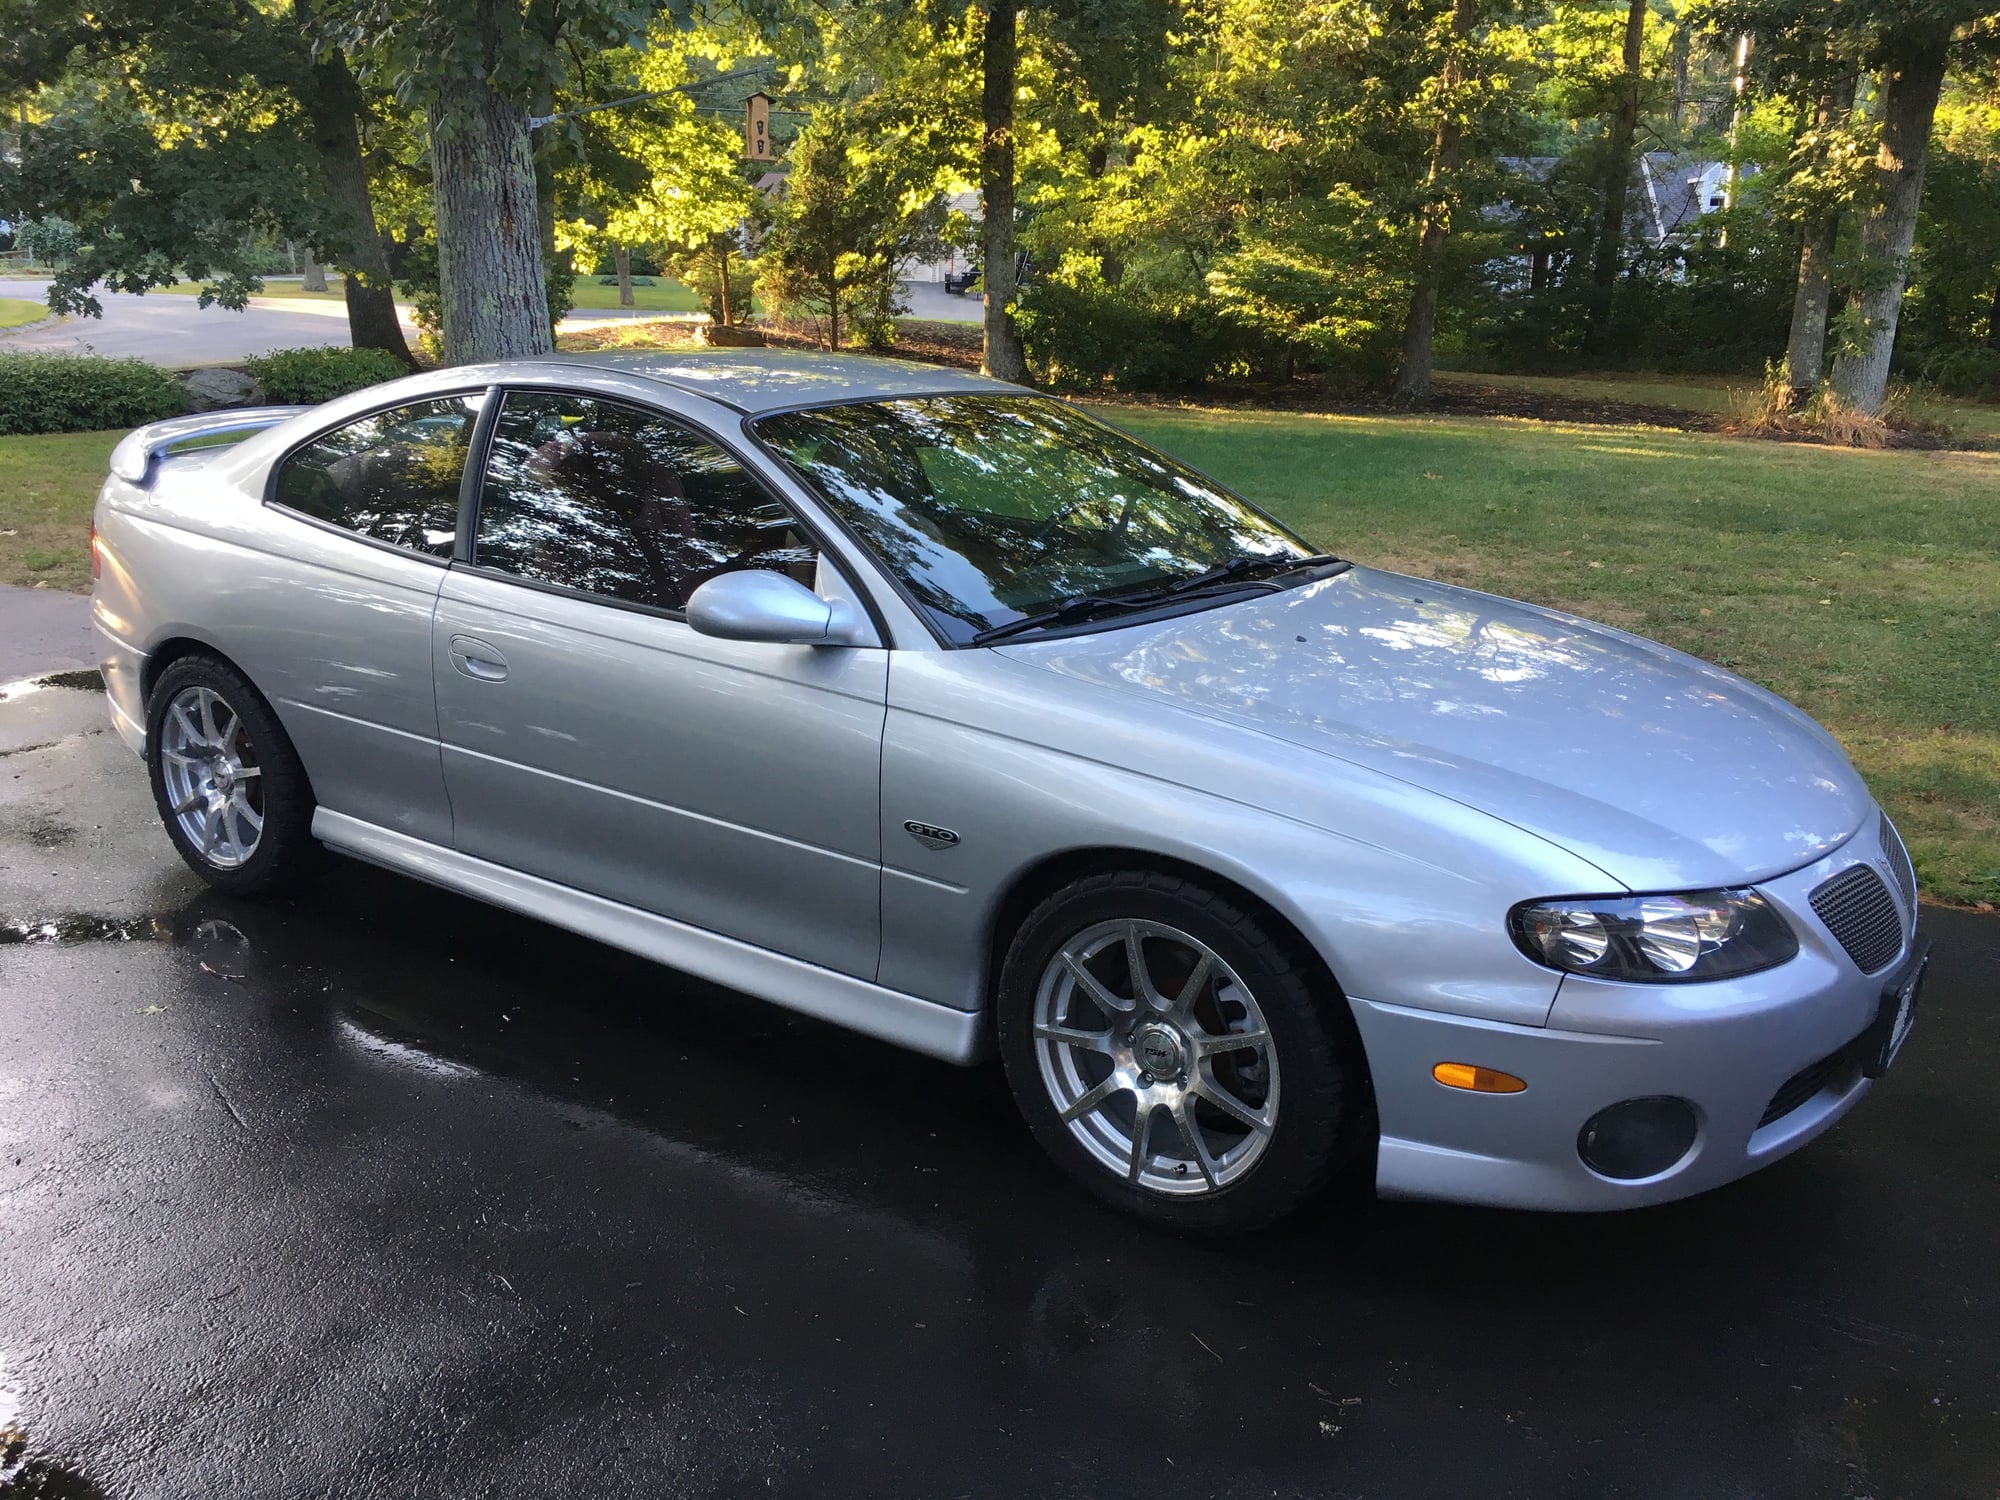 2004 Pontiac GTO - 2004 GTO M6 with LS3 - Used - VIN 6G2VX12GX4L287411 - 9,999,999 Miles - 8 cyl - 2WD - Manual - Coupe - Silver - Bridgewater, MA 02324, United States